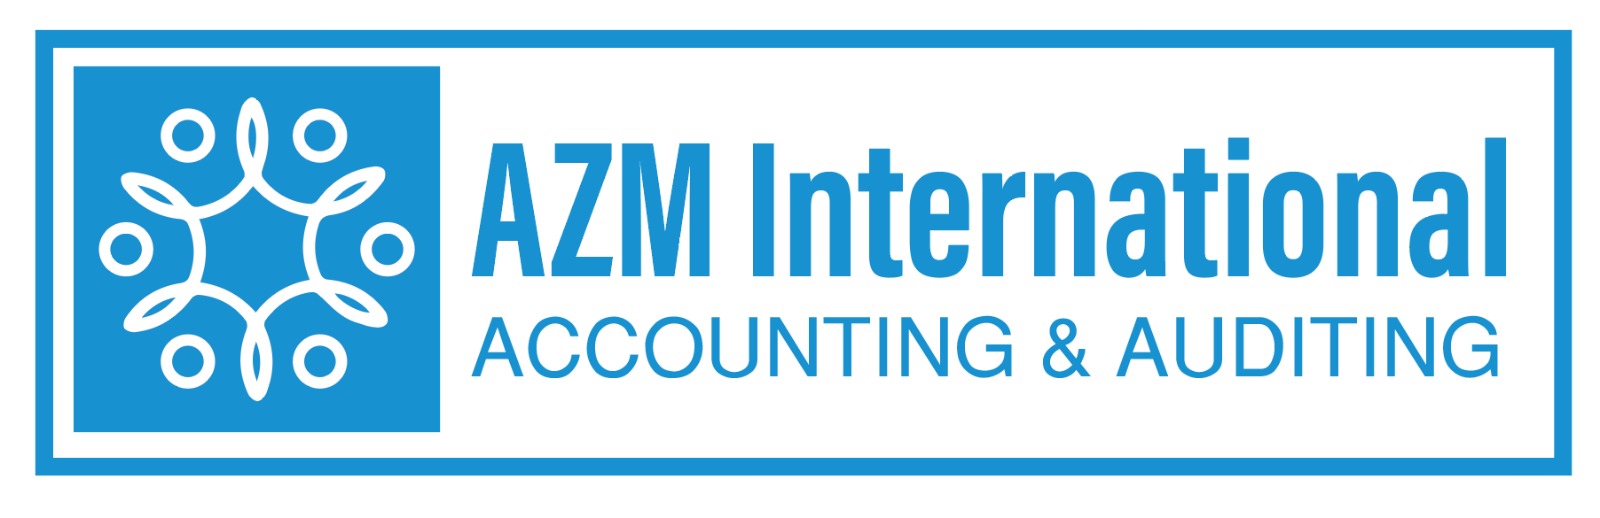 AZM International Accounting and Auditing